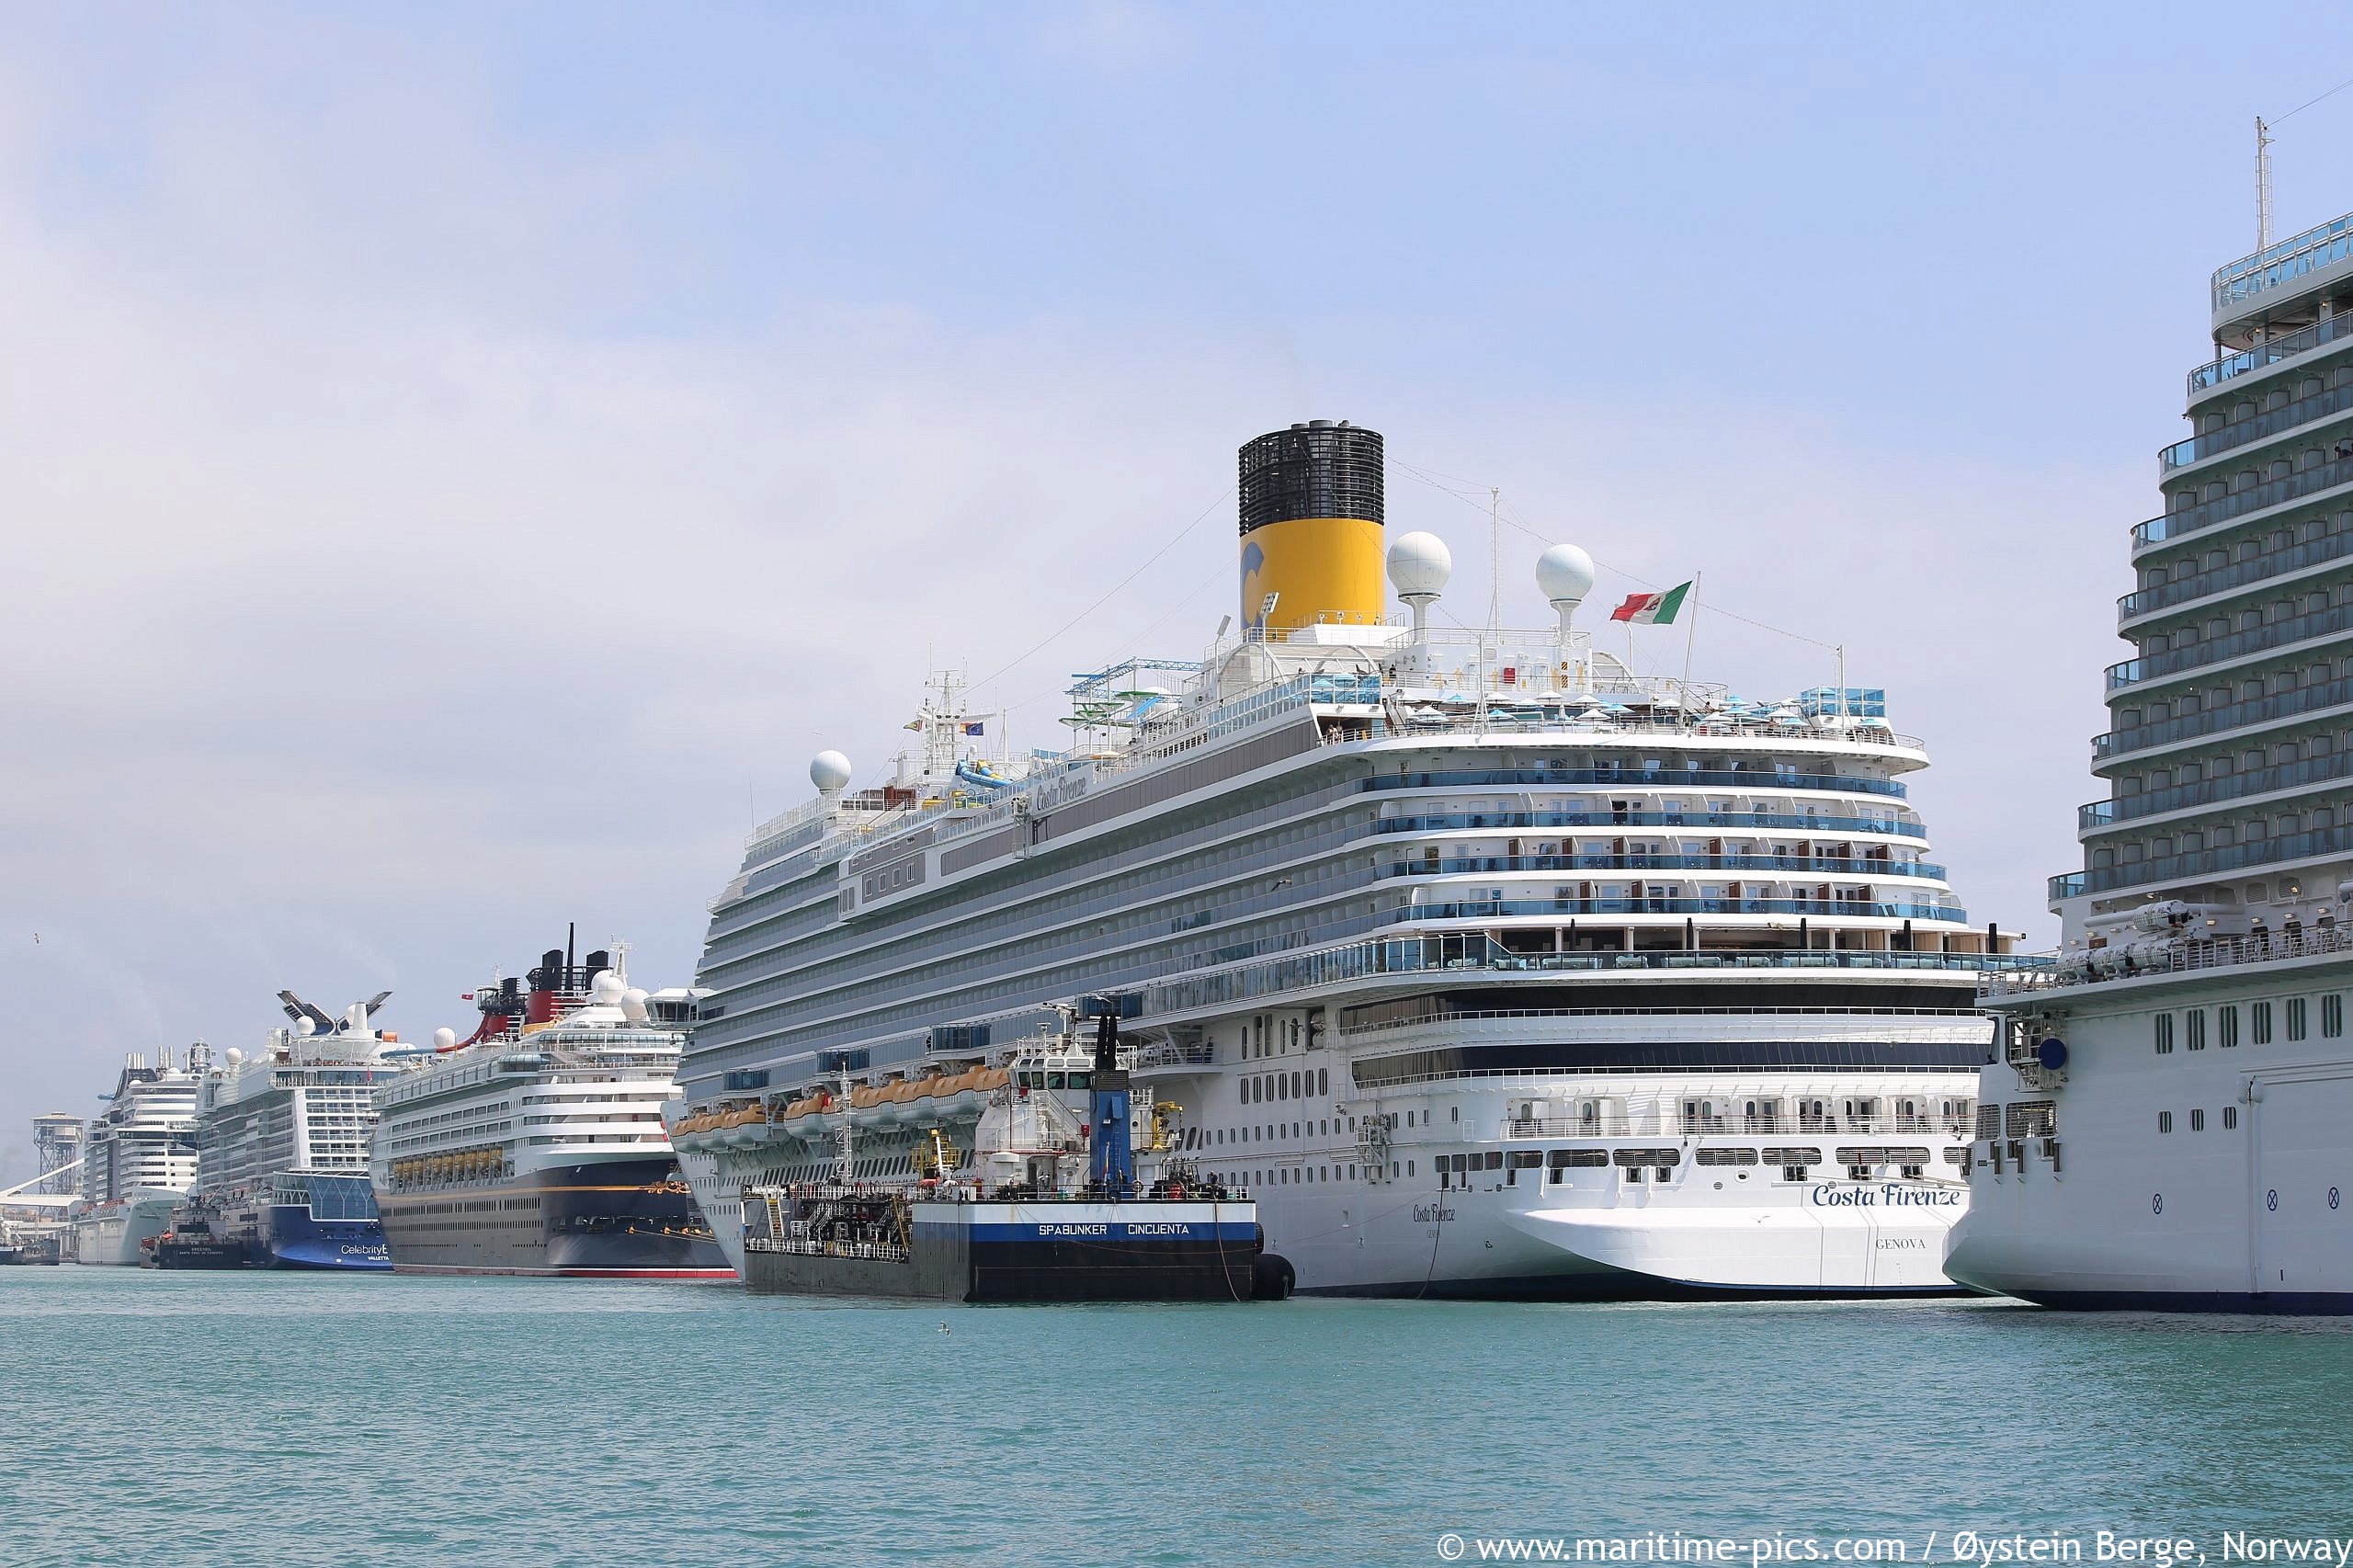 THE CRUISE PORT IN BARCELONA / SPAIN, 23 JULY 2022 - Maritime-Pics